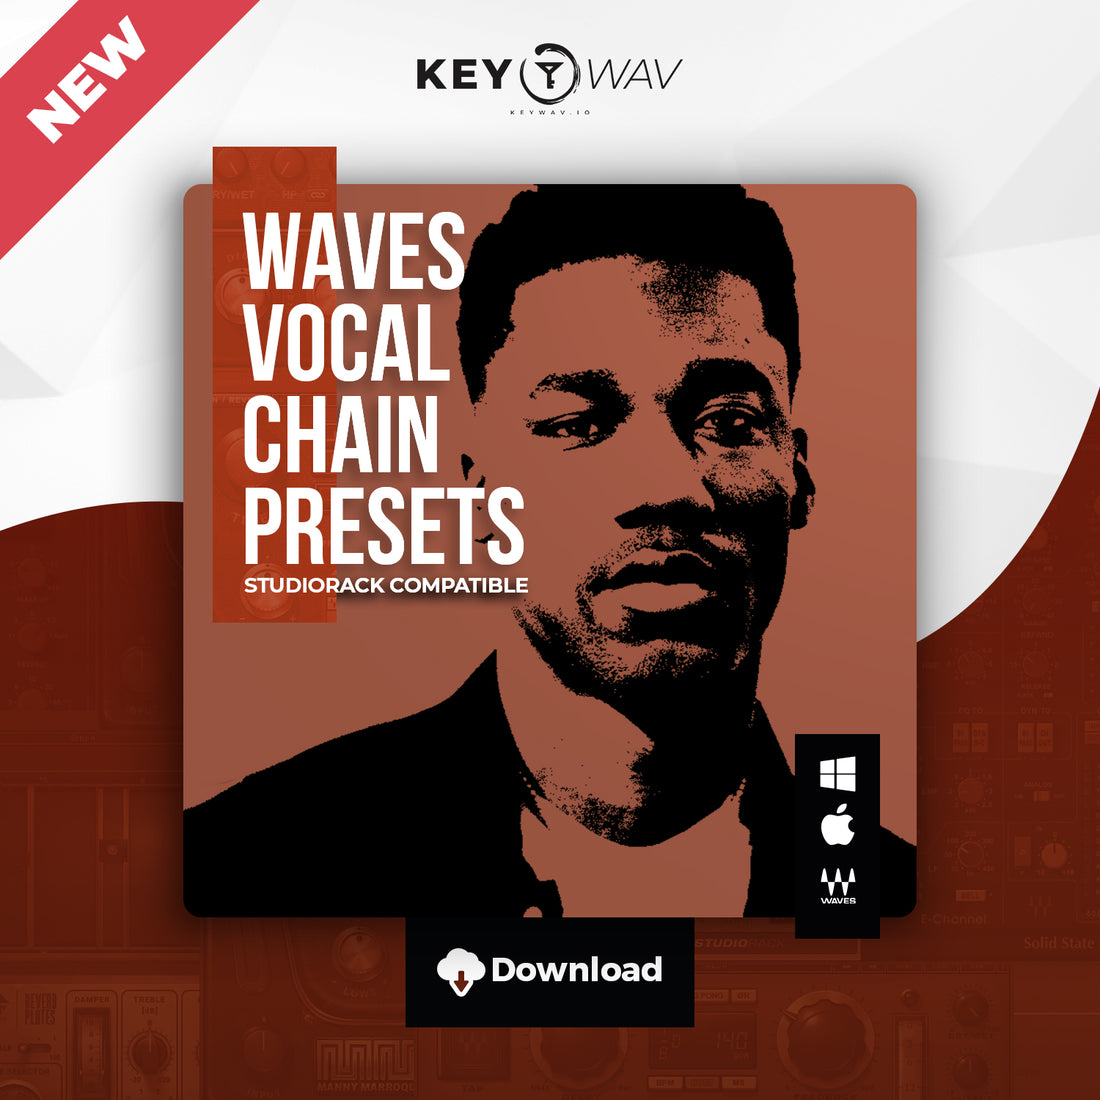 "Windy City" WAVES Vocal Chain Preset